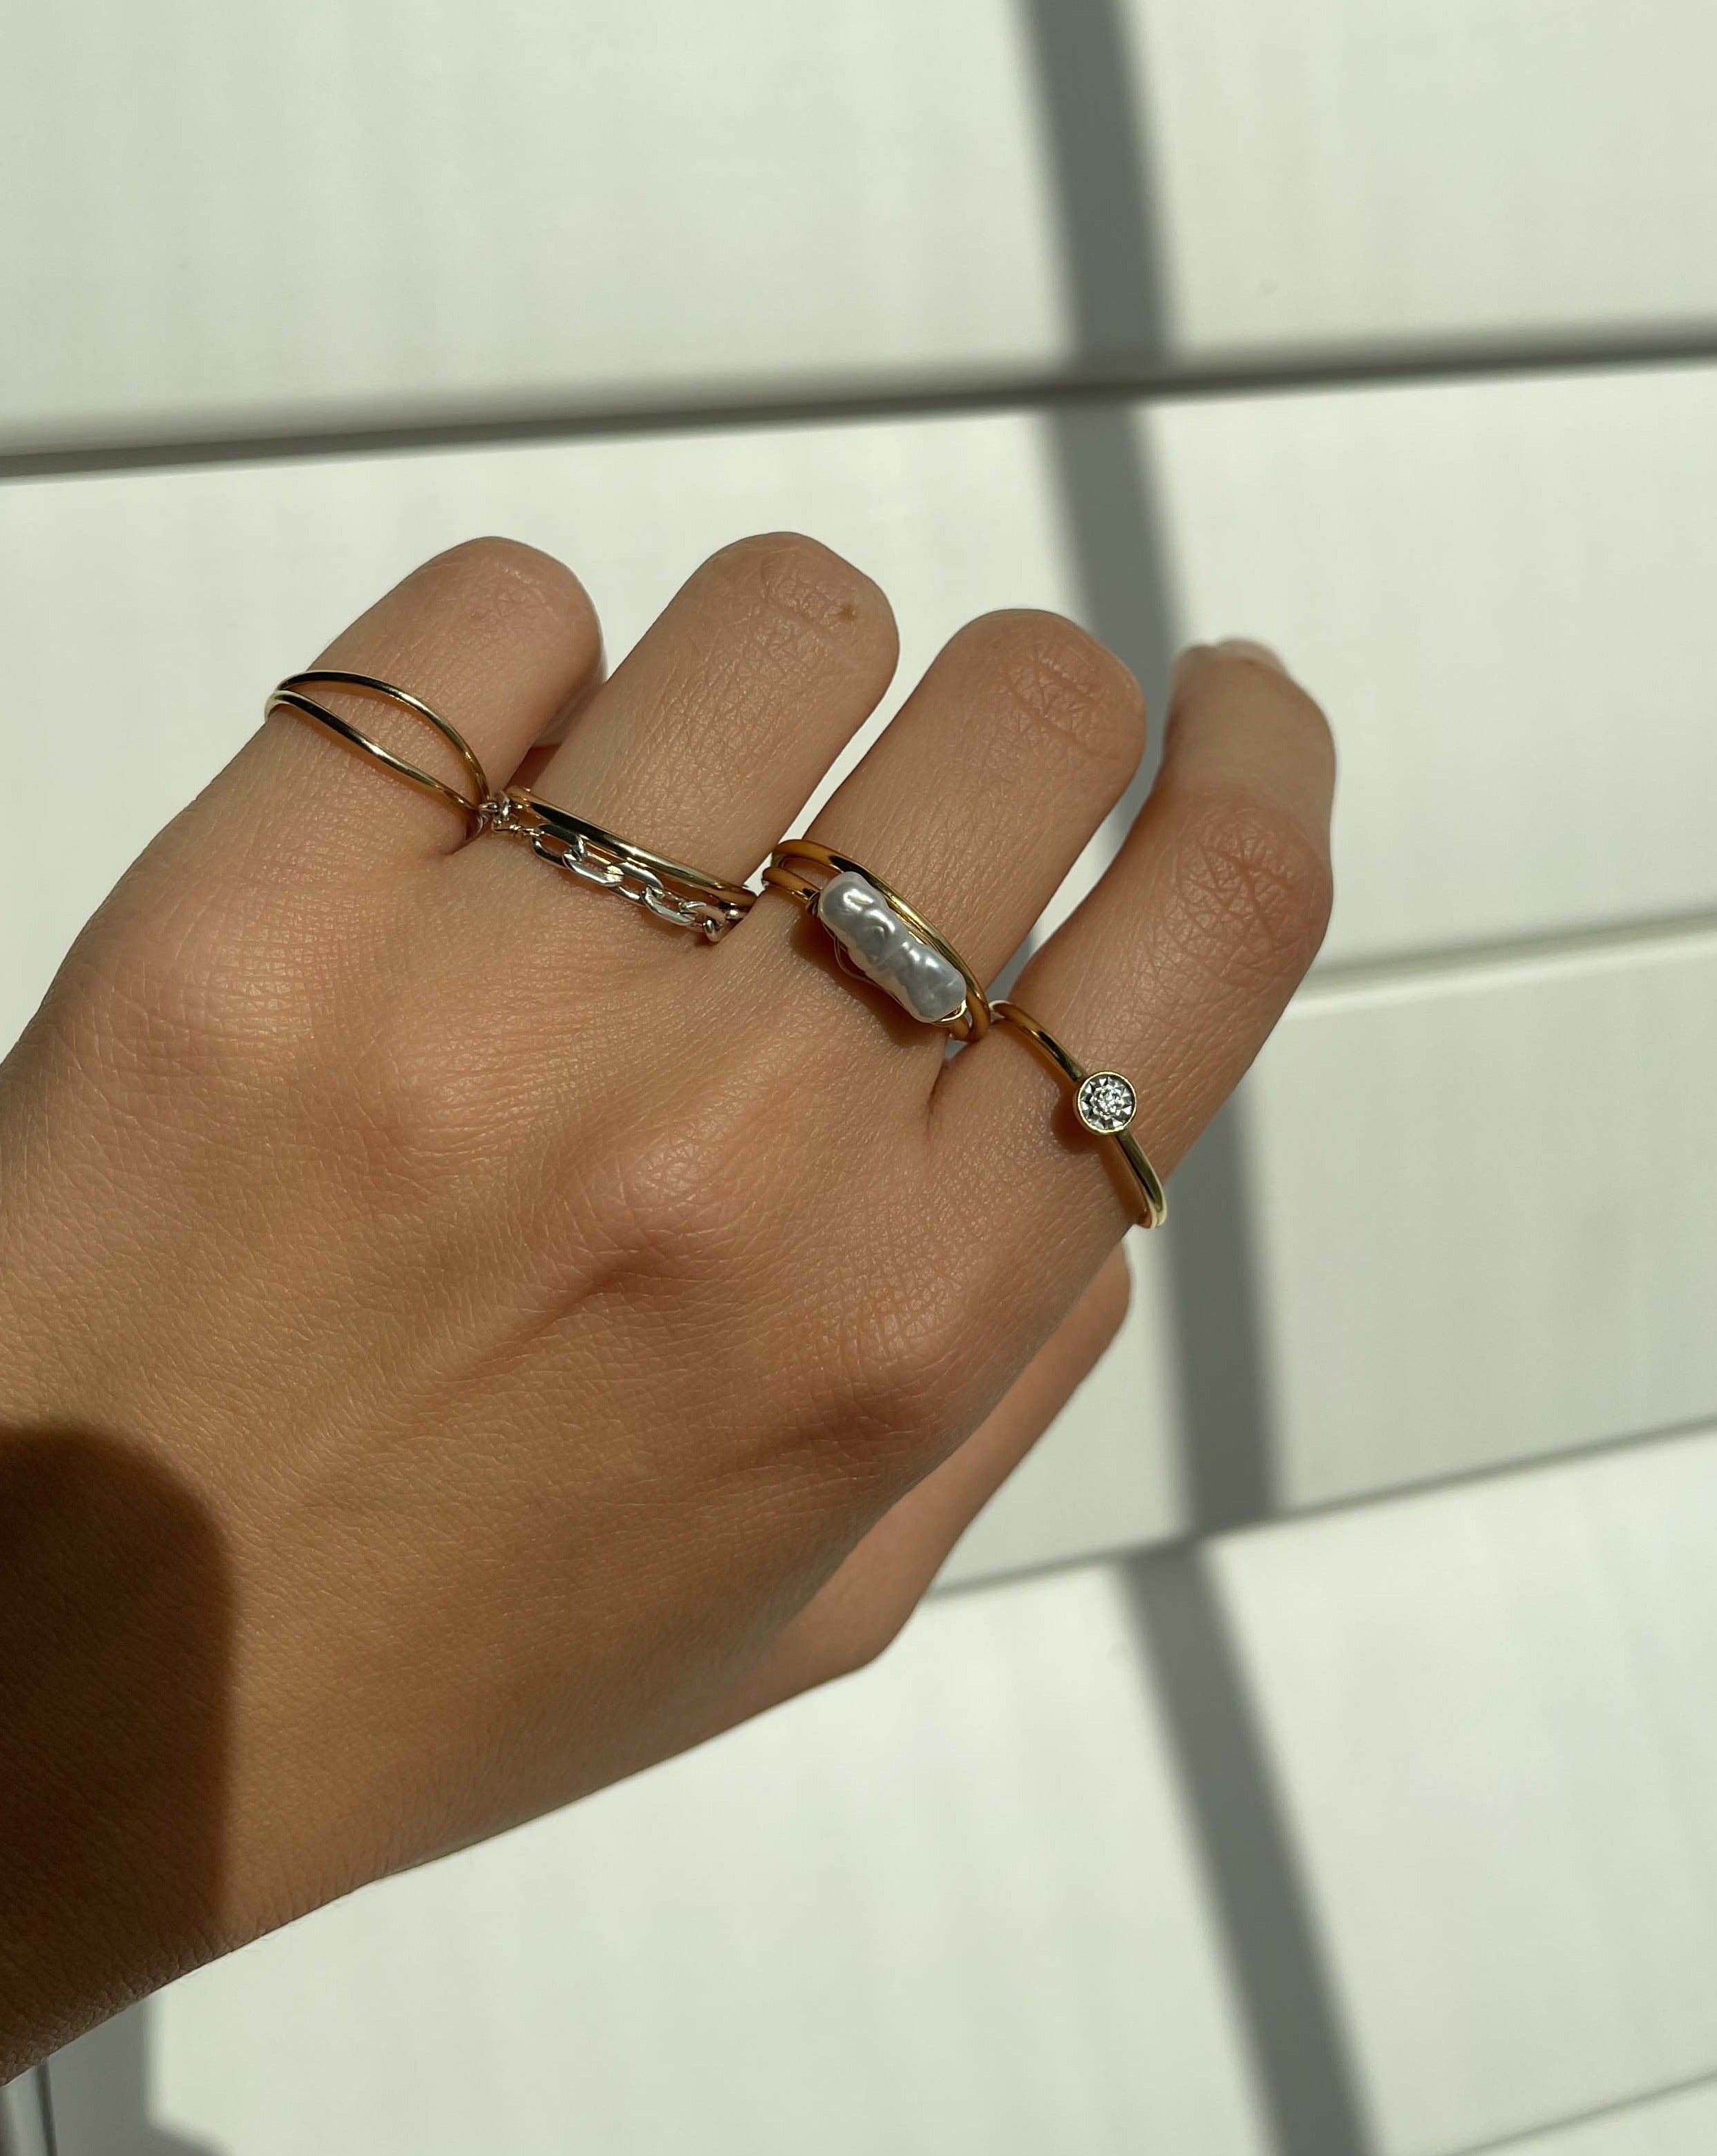 Berkley Ring by KOZAKH. A simple 2mm thick stackable ring crafted in 14K Gold Filled.